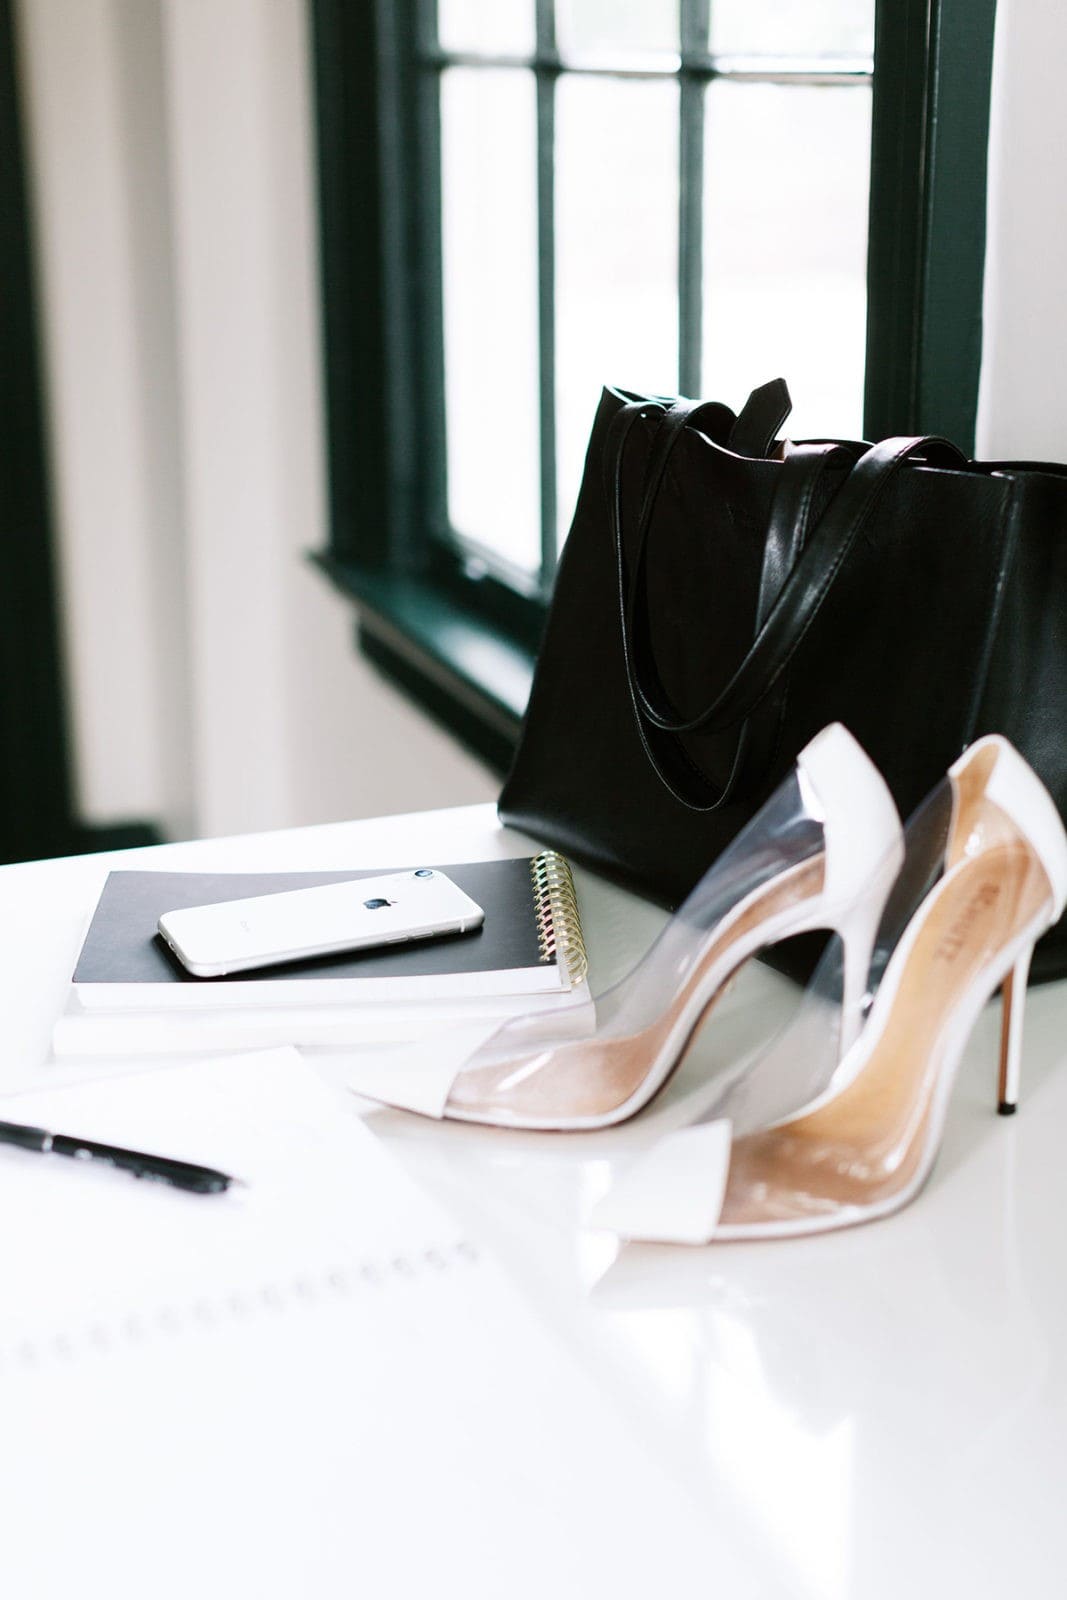 Heels, black purse, and iphone on white desk.